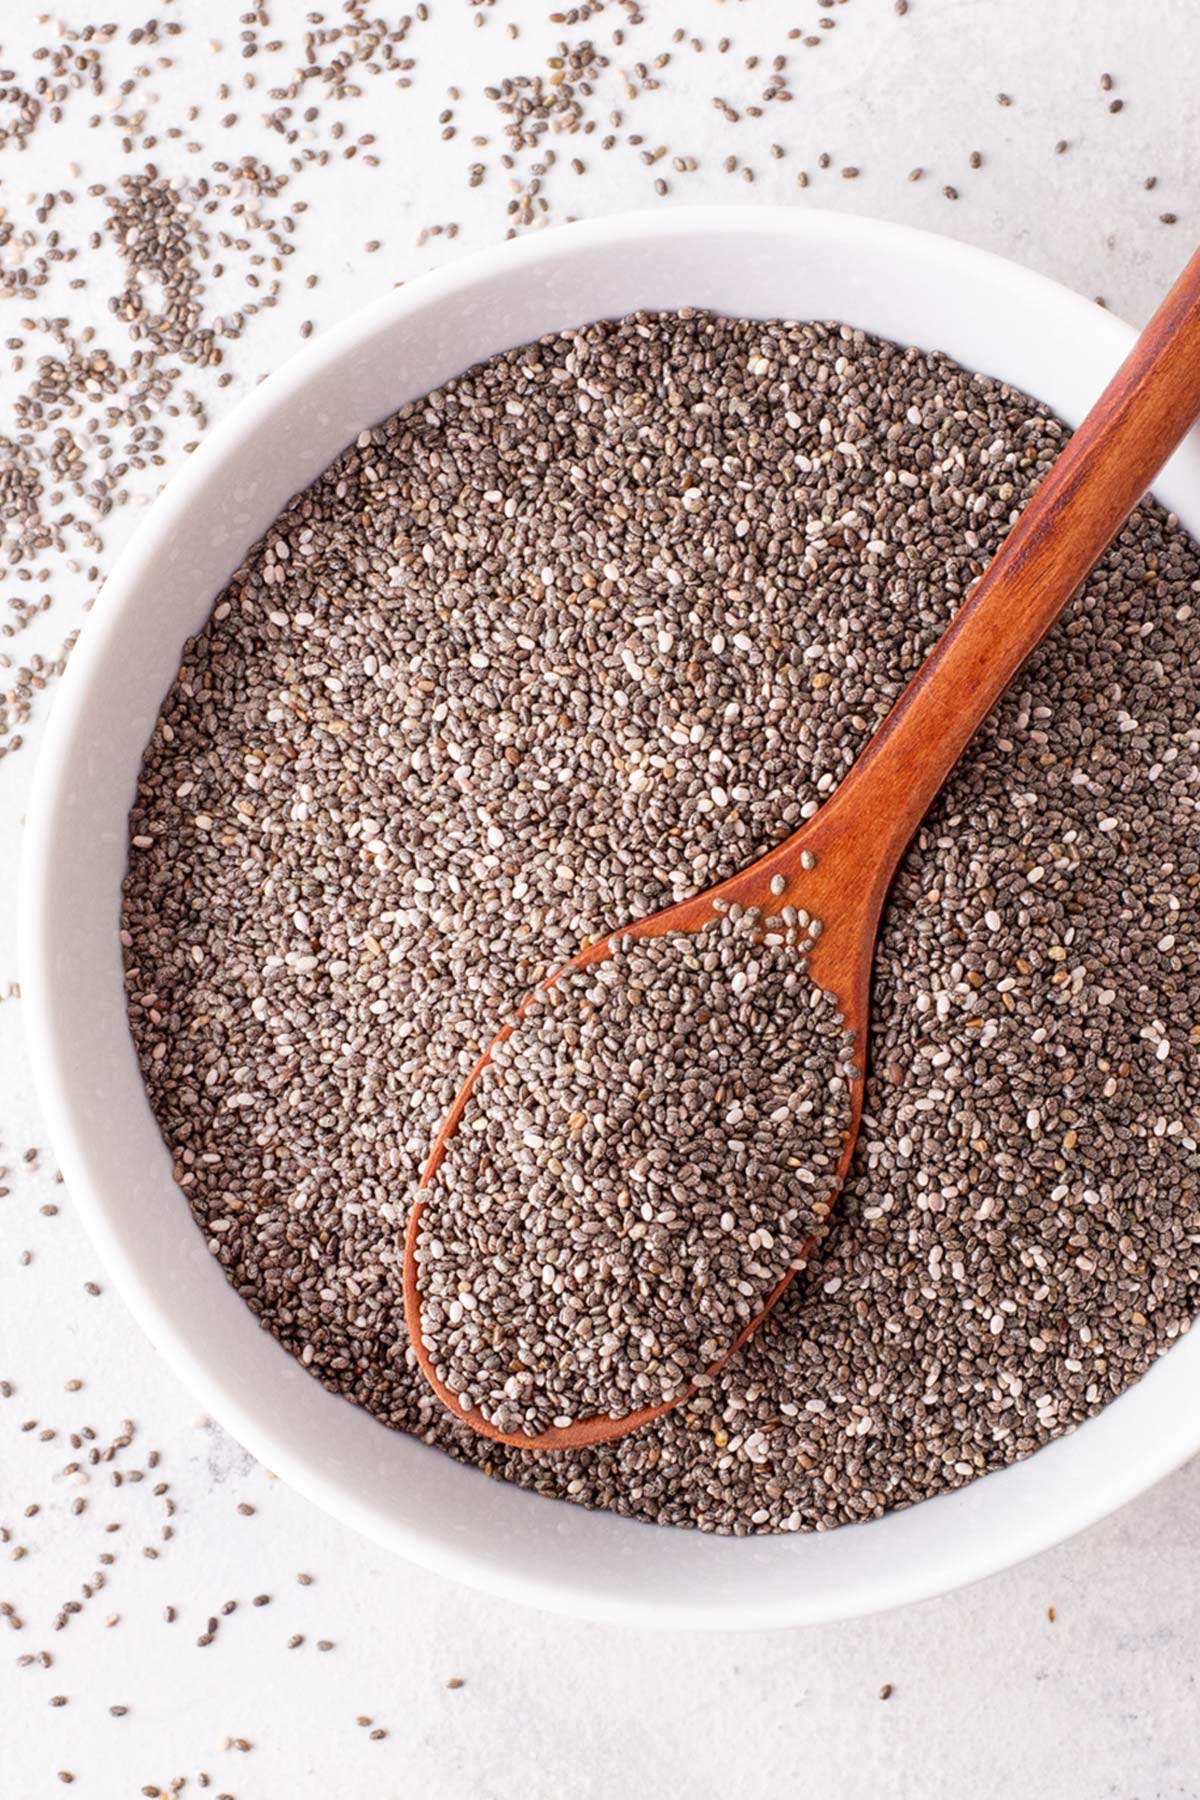 Chia seeds in a white bowl with a wooden spoon.